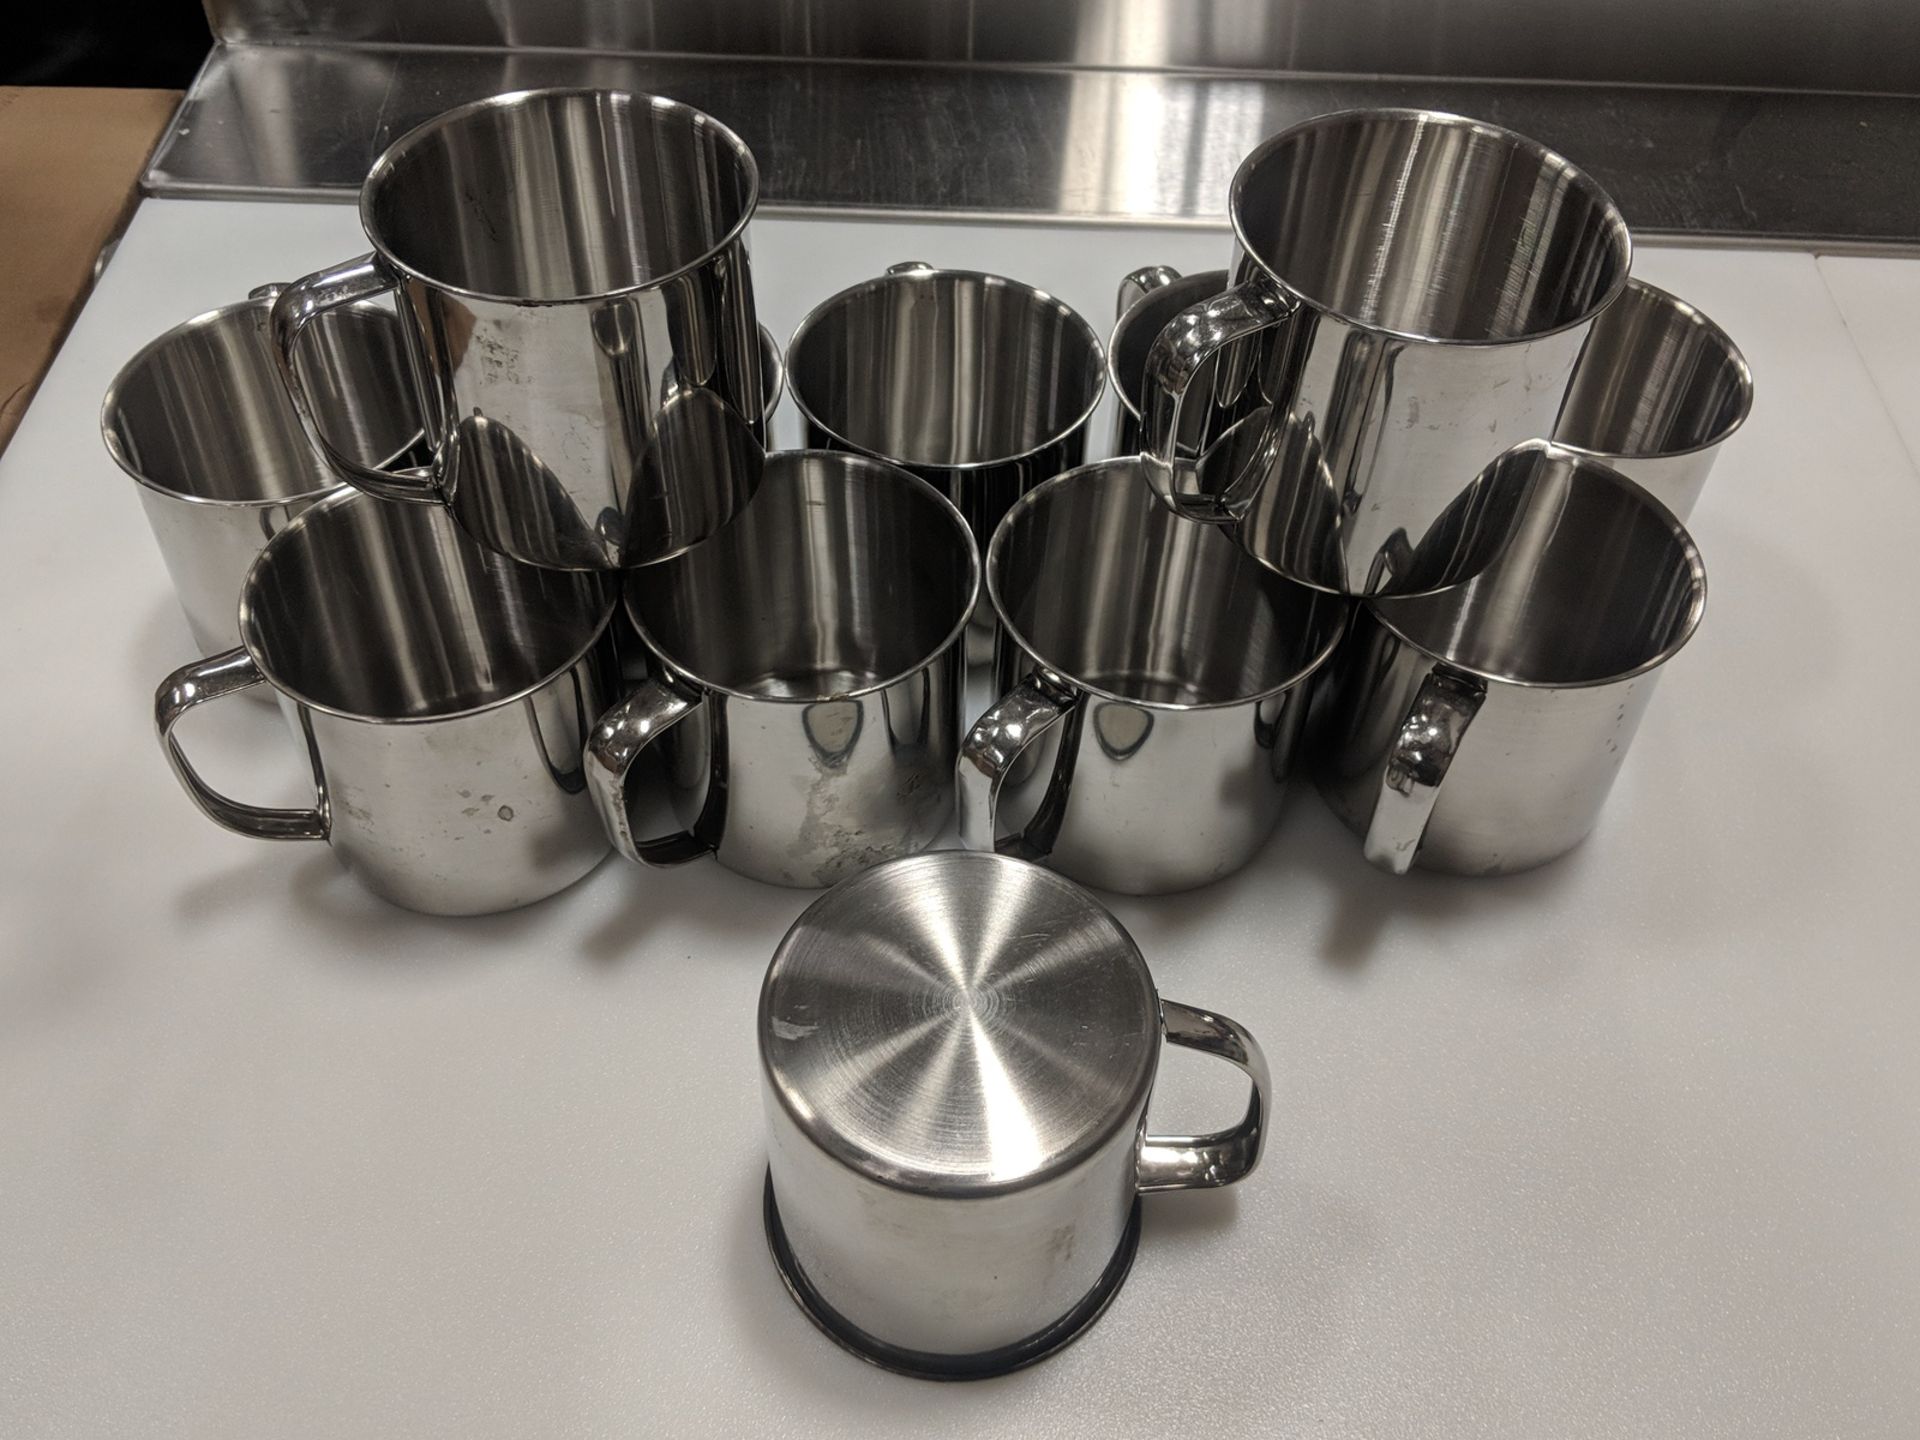 Small Stainless Steel Mugs - Lot of 12 - Image 2 of 3